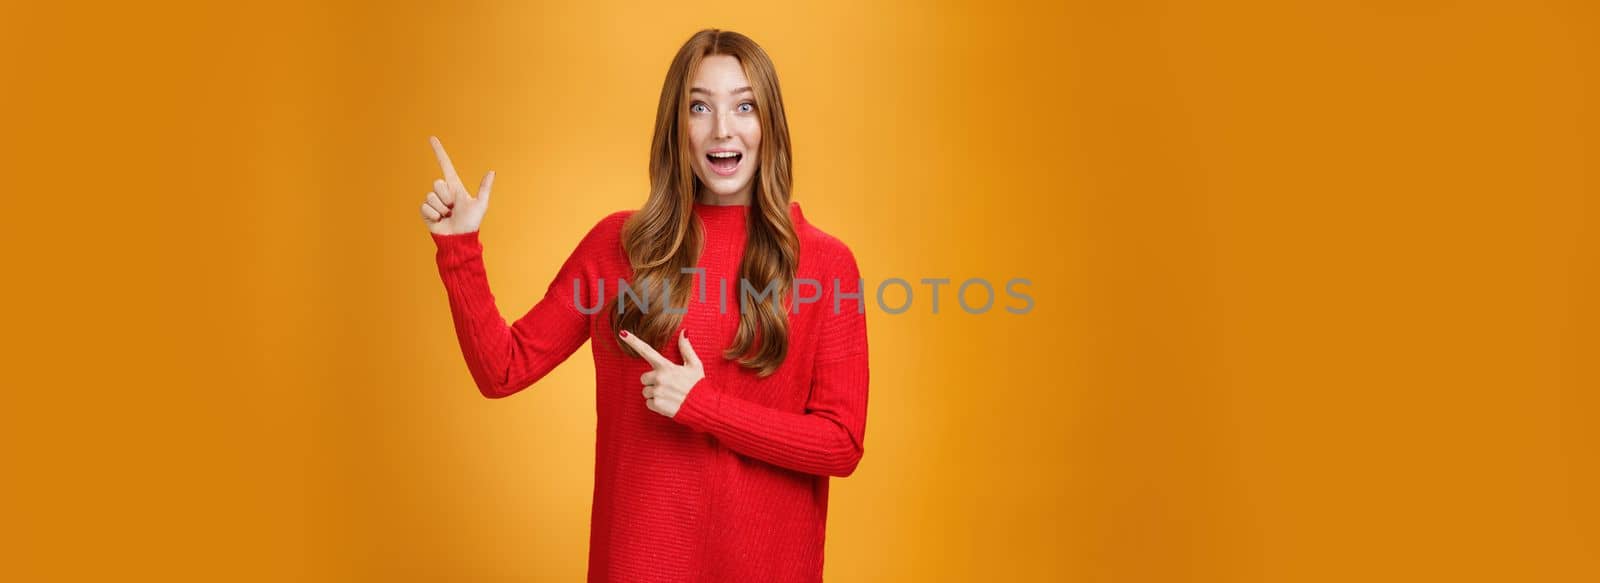 Lifestyle. Enthusiastic and ambitious cute redhead female with freckles in red dress pointing at upper right corner smiling amazed and curious as exploring awesome new space posing over orange background.